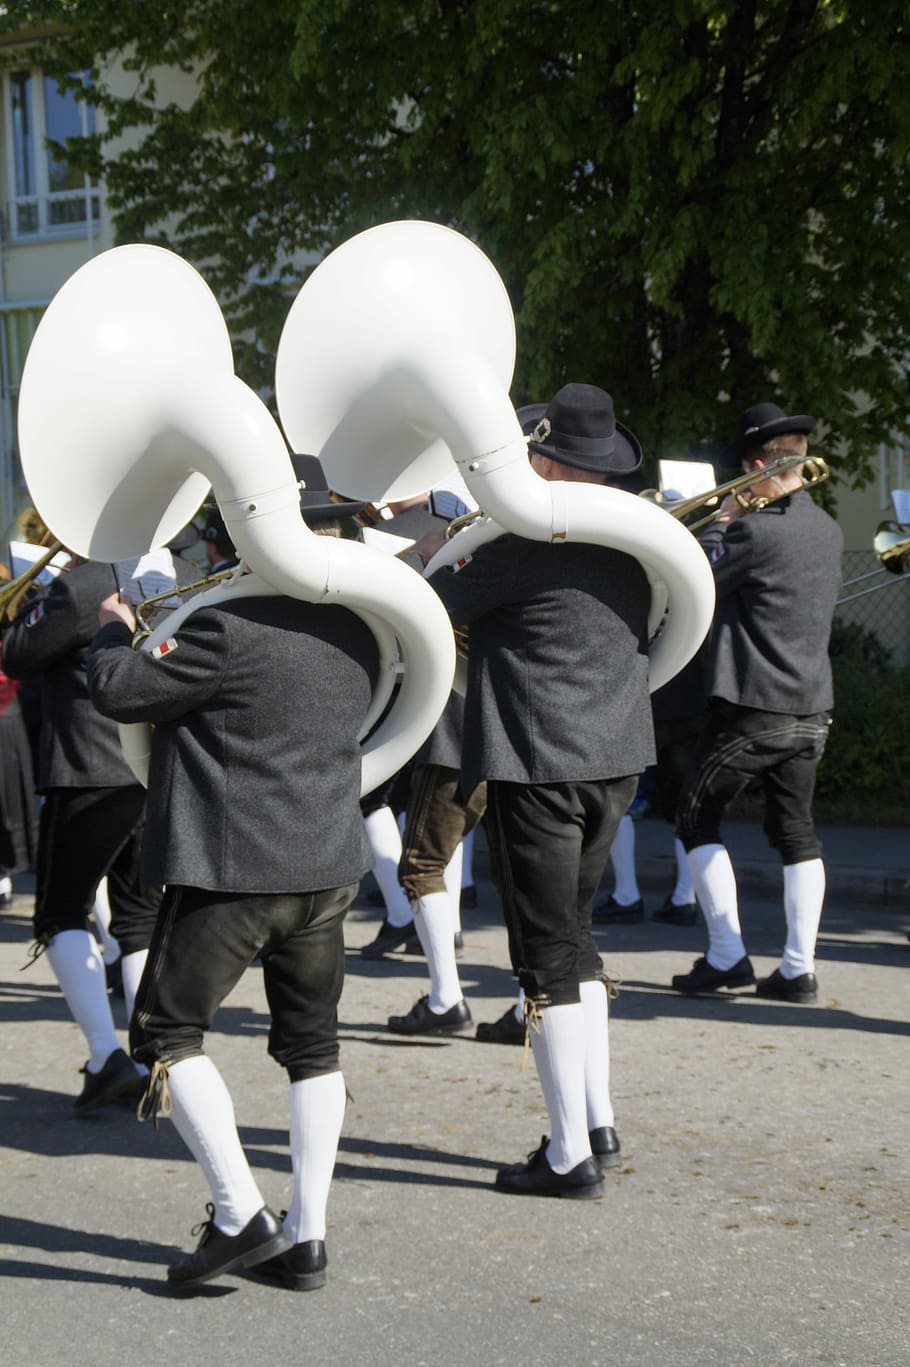 Brass Band, Marching, Costume, Bavarian, music band, chapel, street festival, pageant, instrument, music